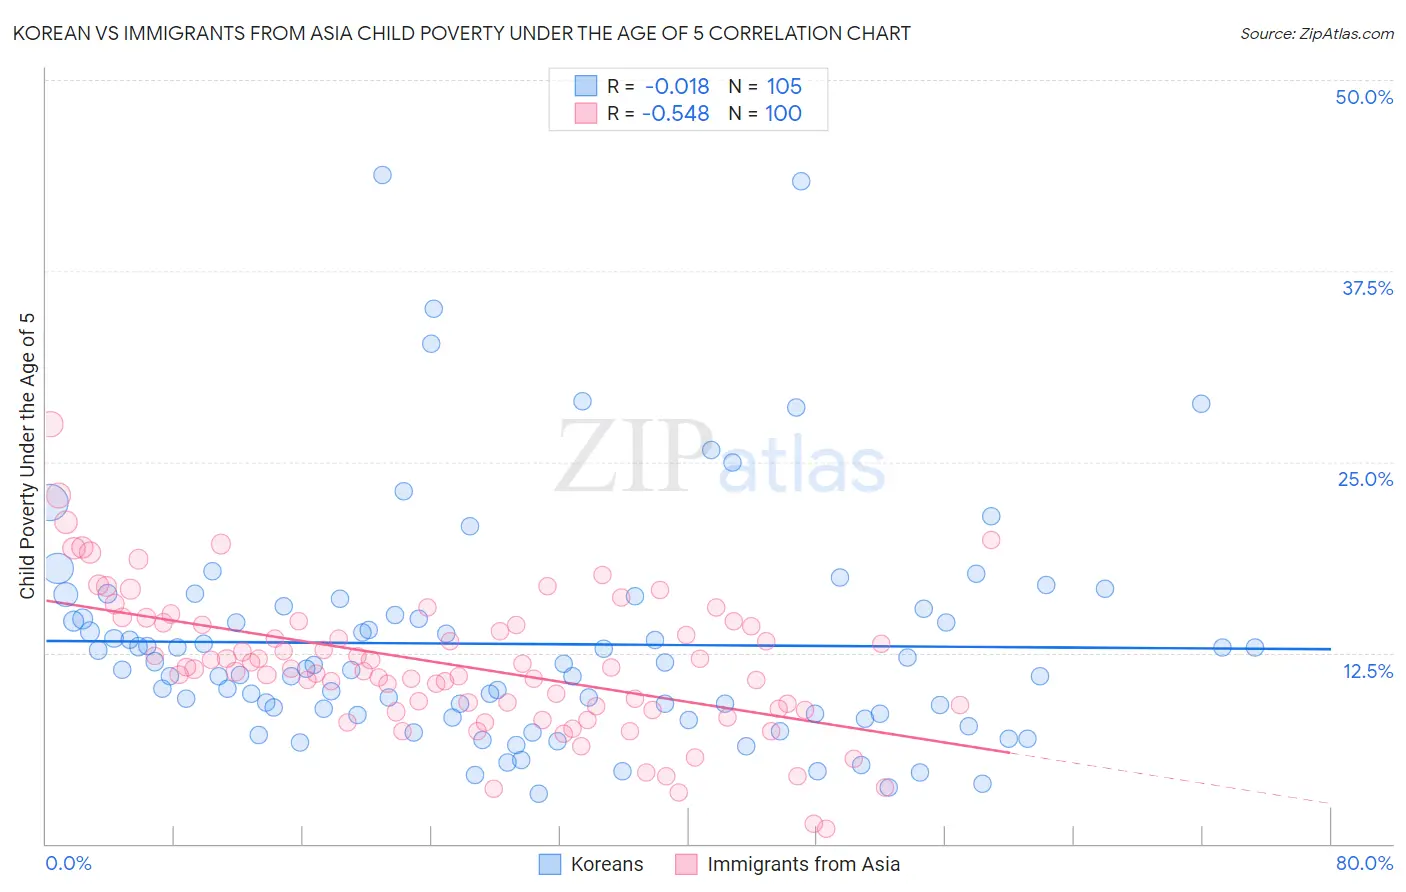 Korean vs Immigrants from Asia Child Poverty Under the Age of 5